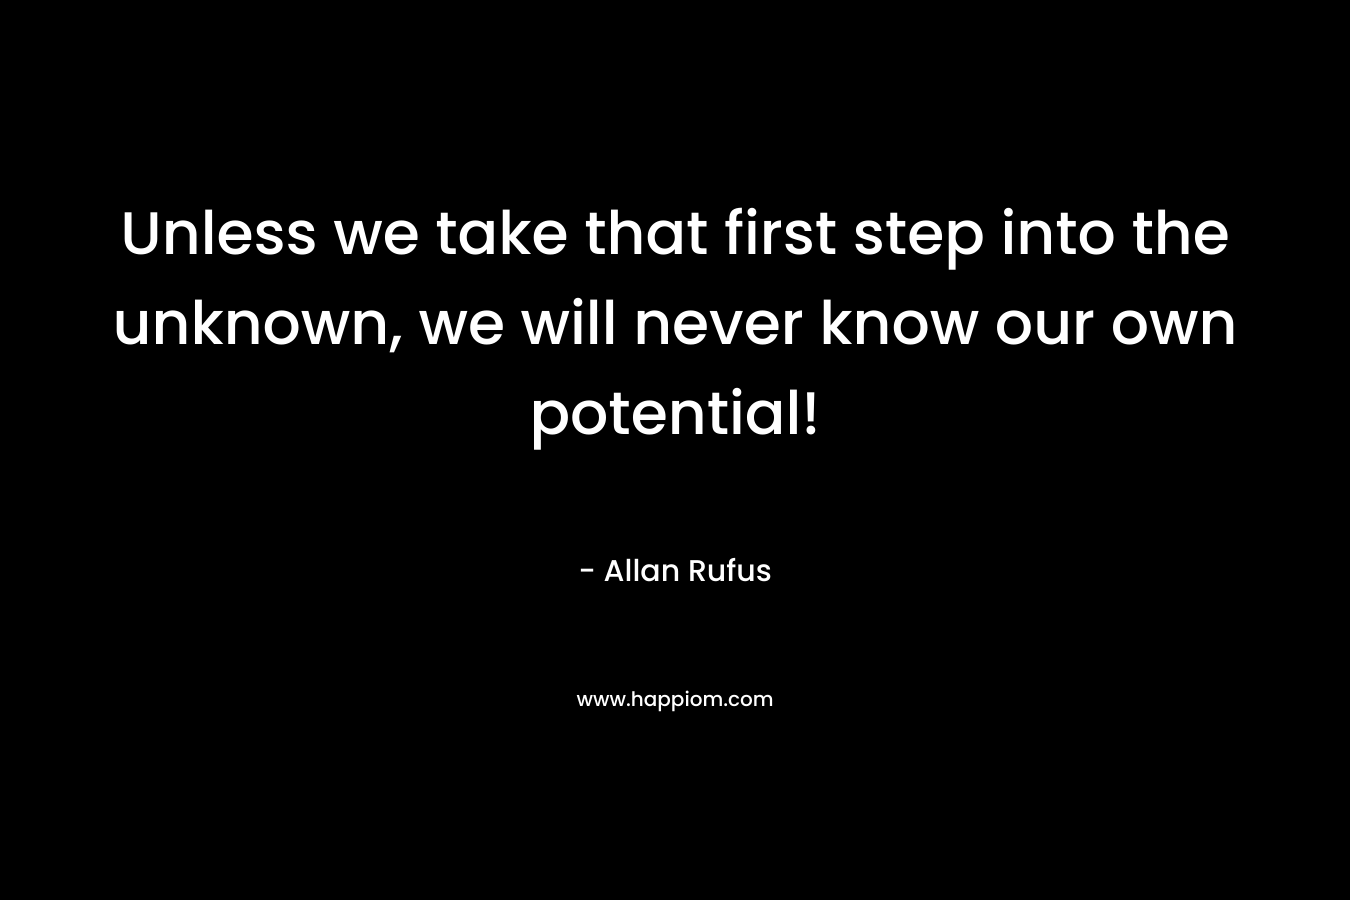 Unless we take that first step into the unknown, we will never know our own potential! – Allan Rufus